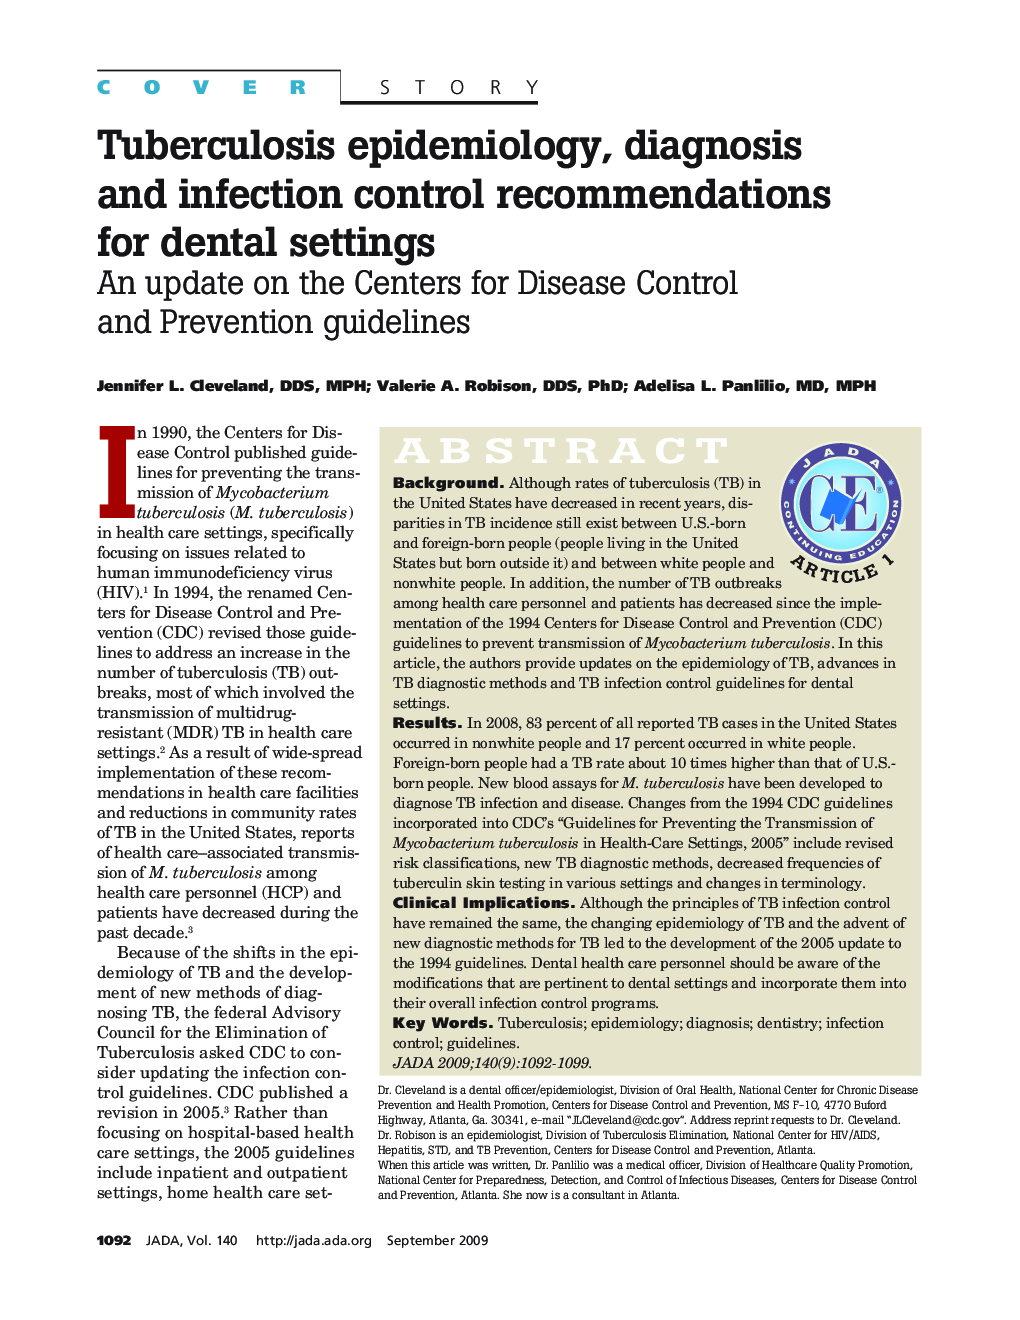 Tuberculosis Epidemiology, Diagnosis and Infection Control Recommendations for Dental Settings : An Update on the Centers for Disease Control and Prevention Guidelines